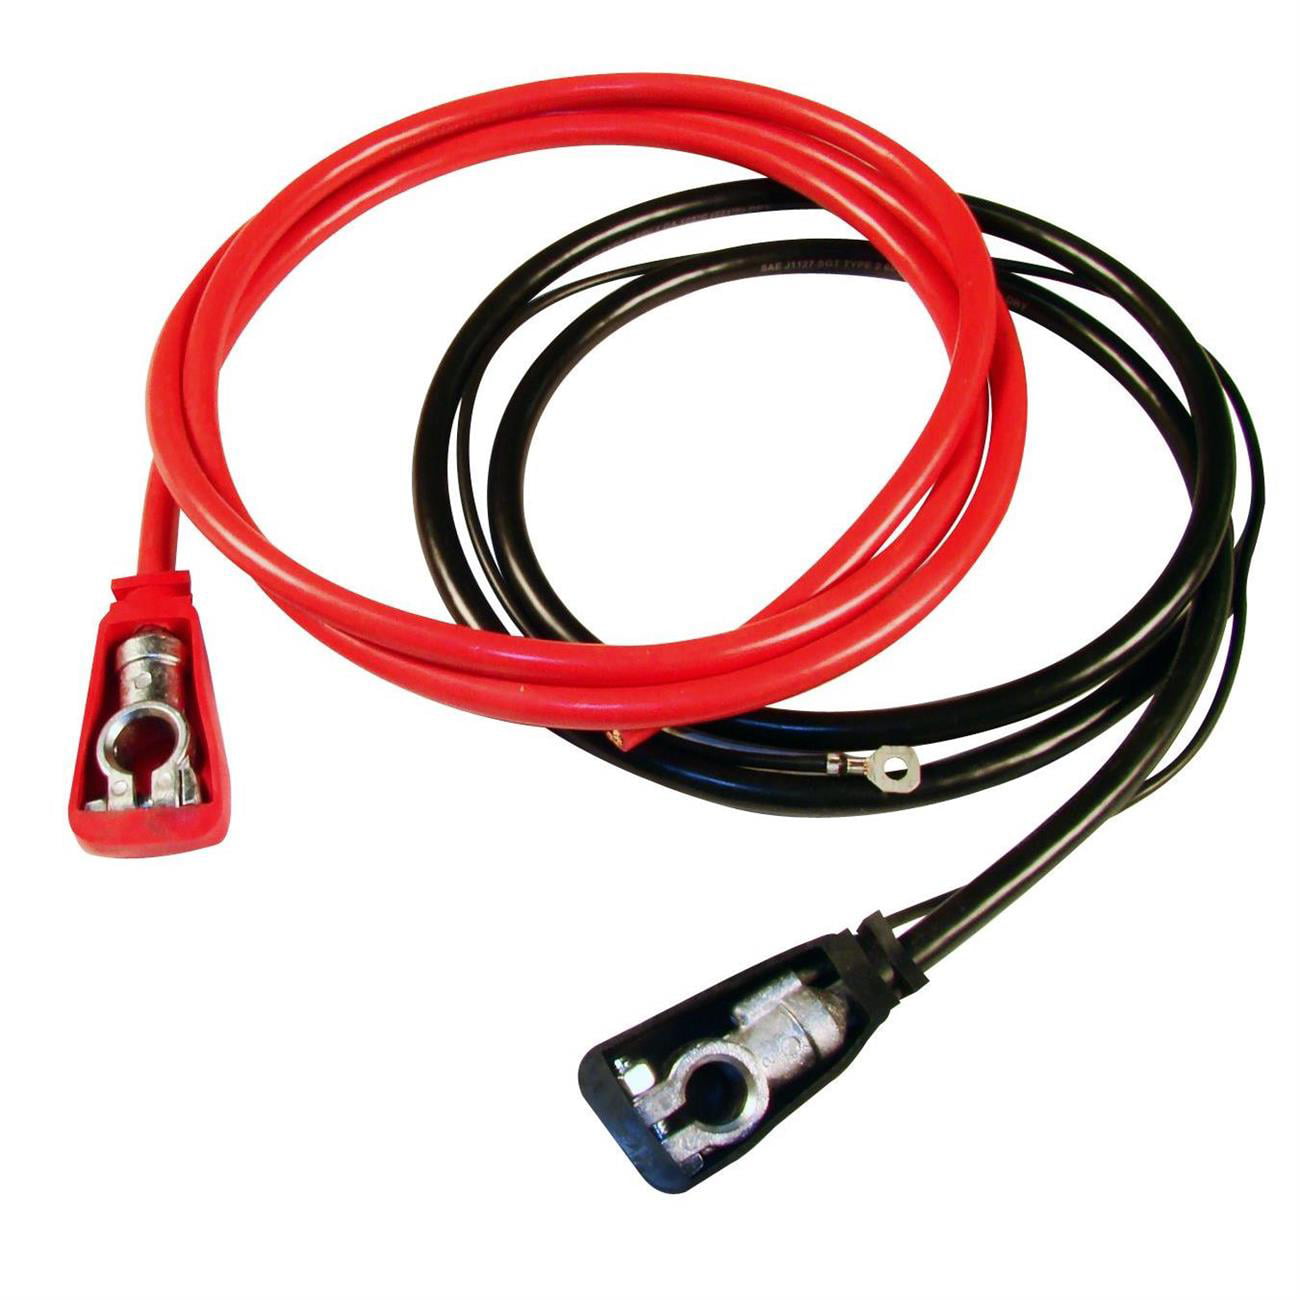  Valley Enterprises Wire Power Supply or Battery Cable